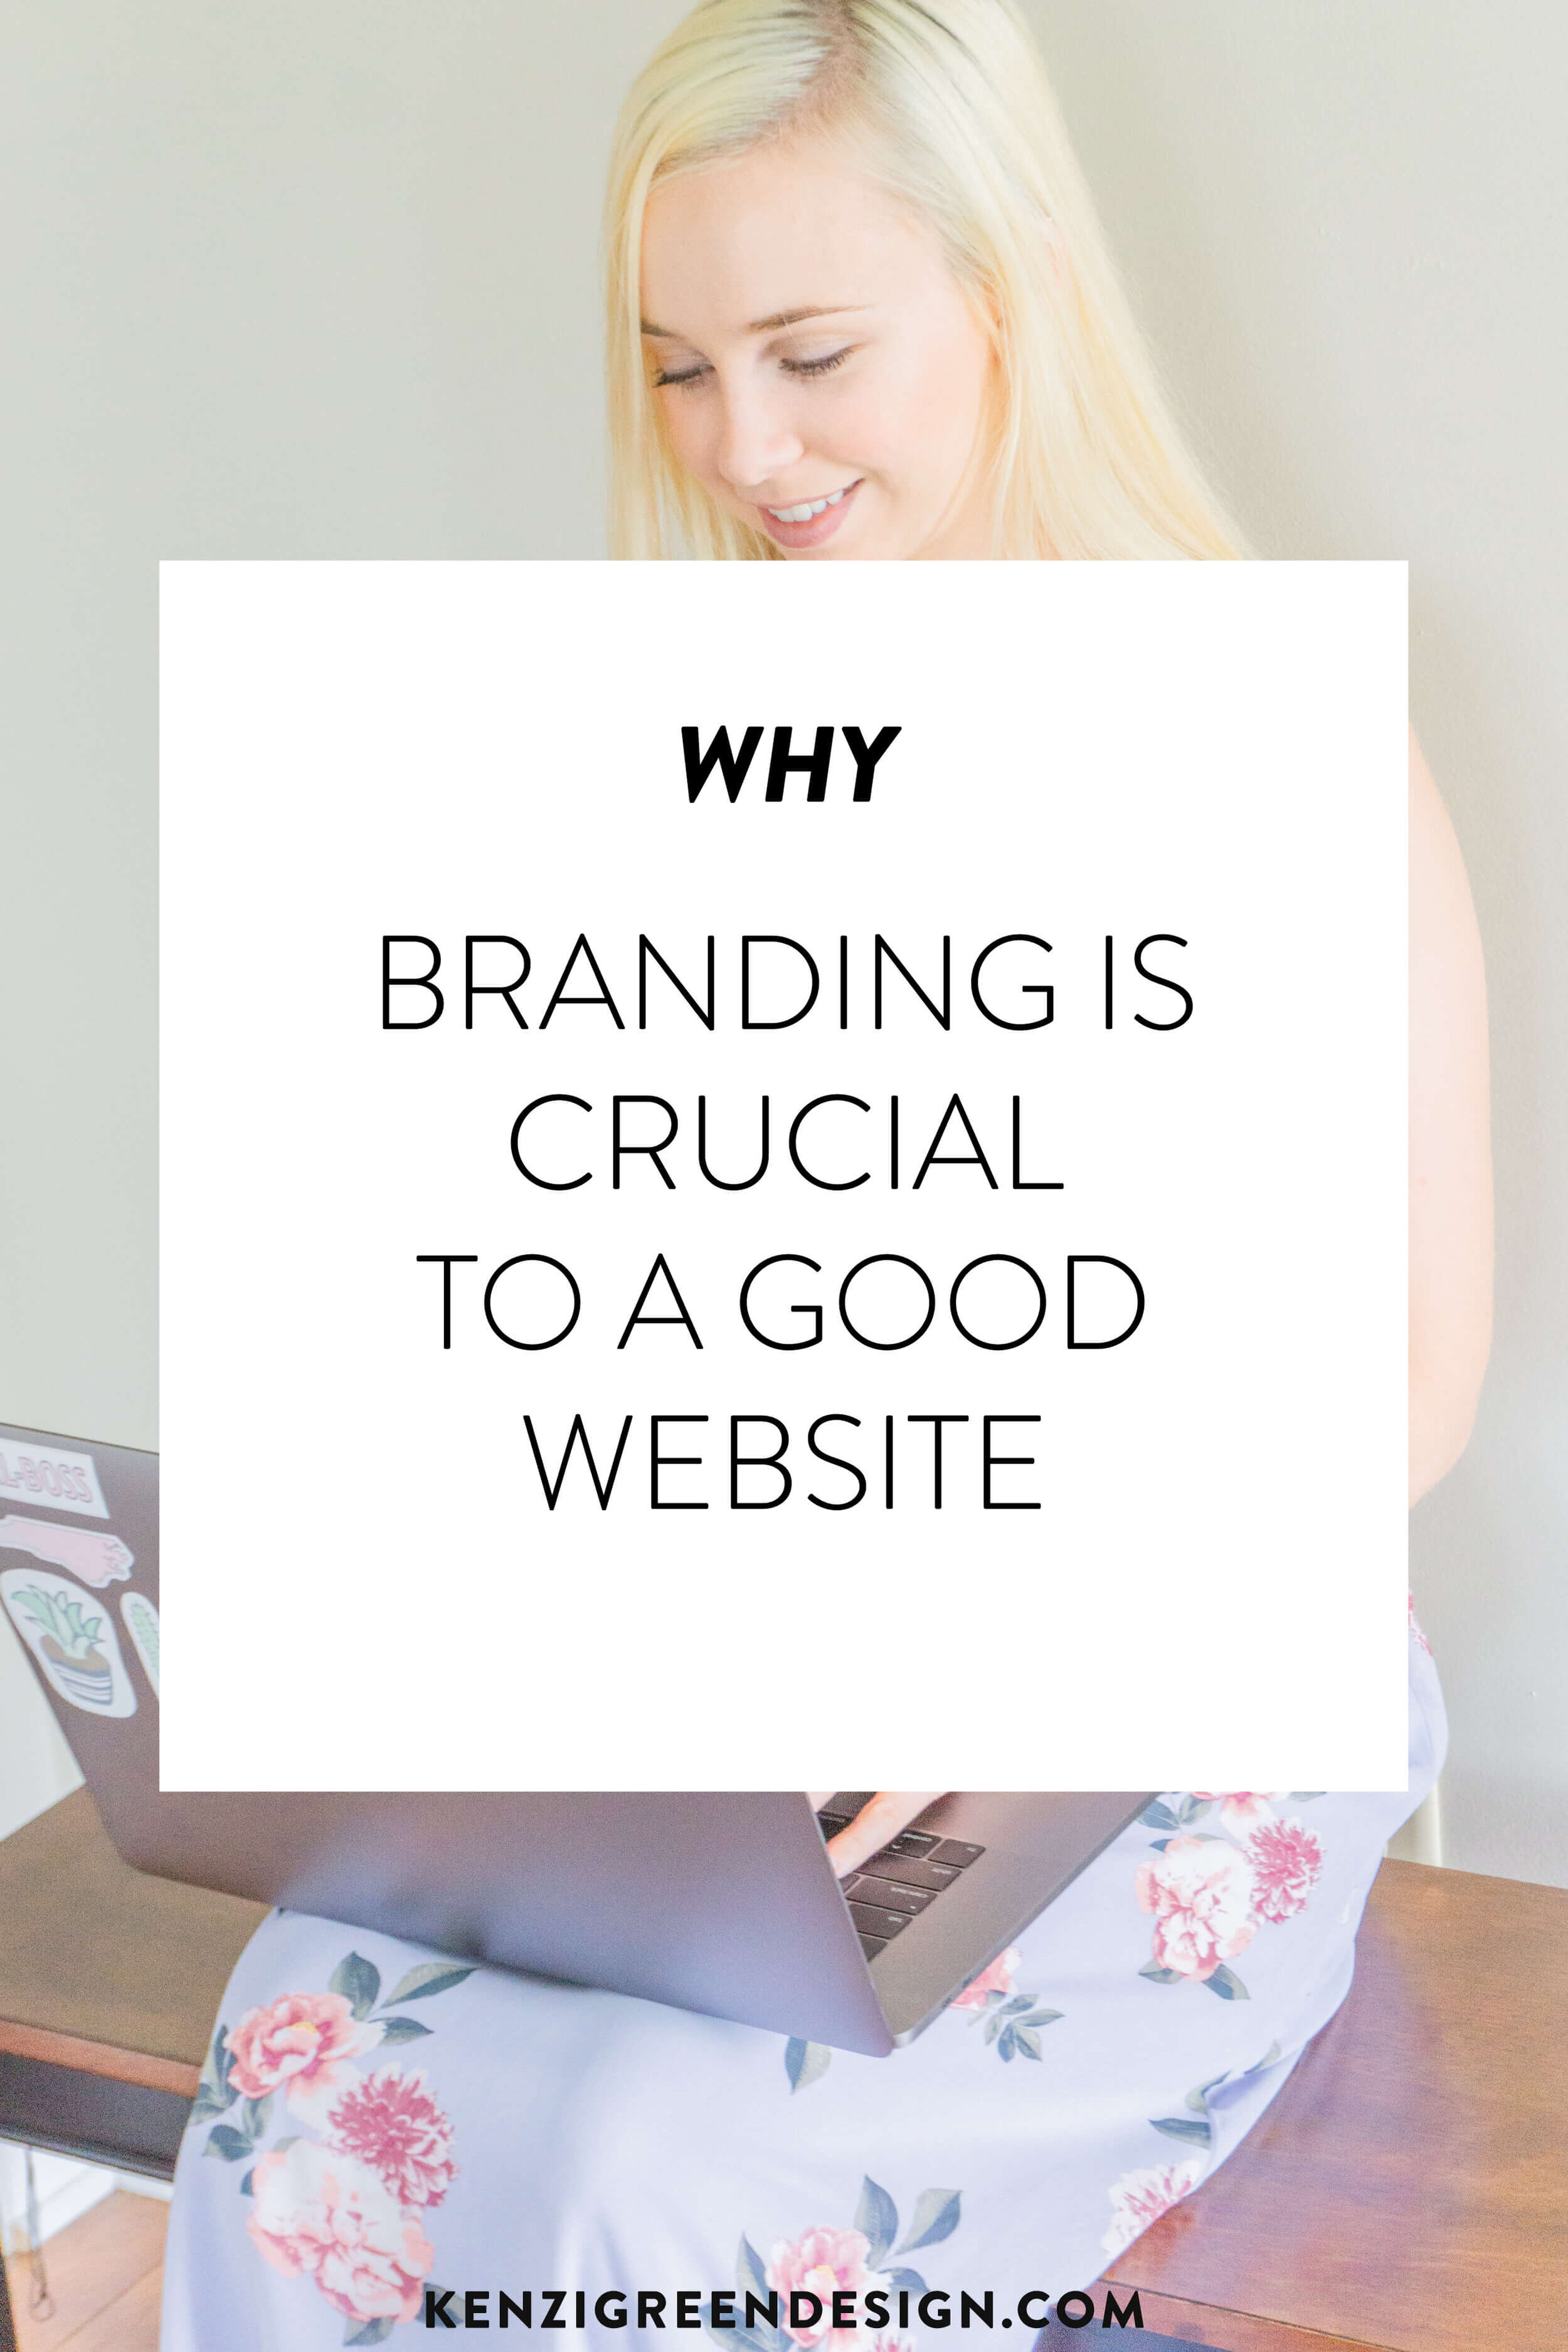 Why branding is crucial to a good website by Kenzi Green Design